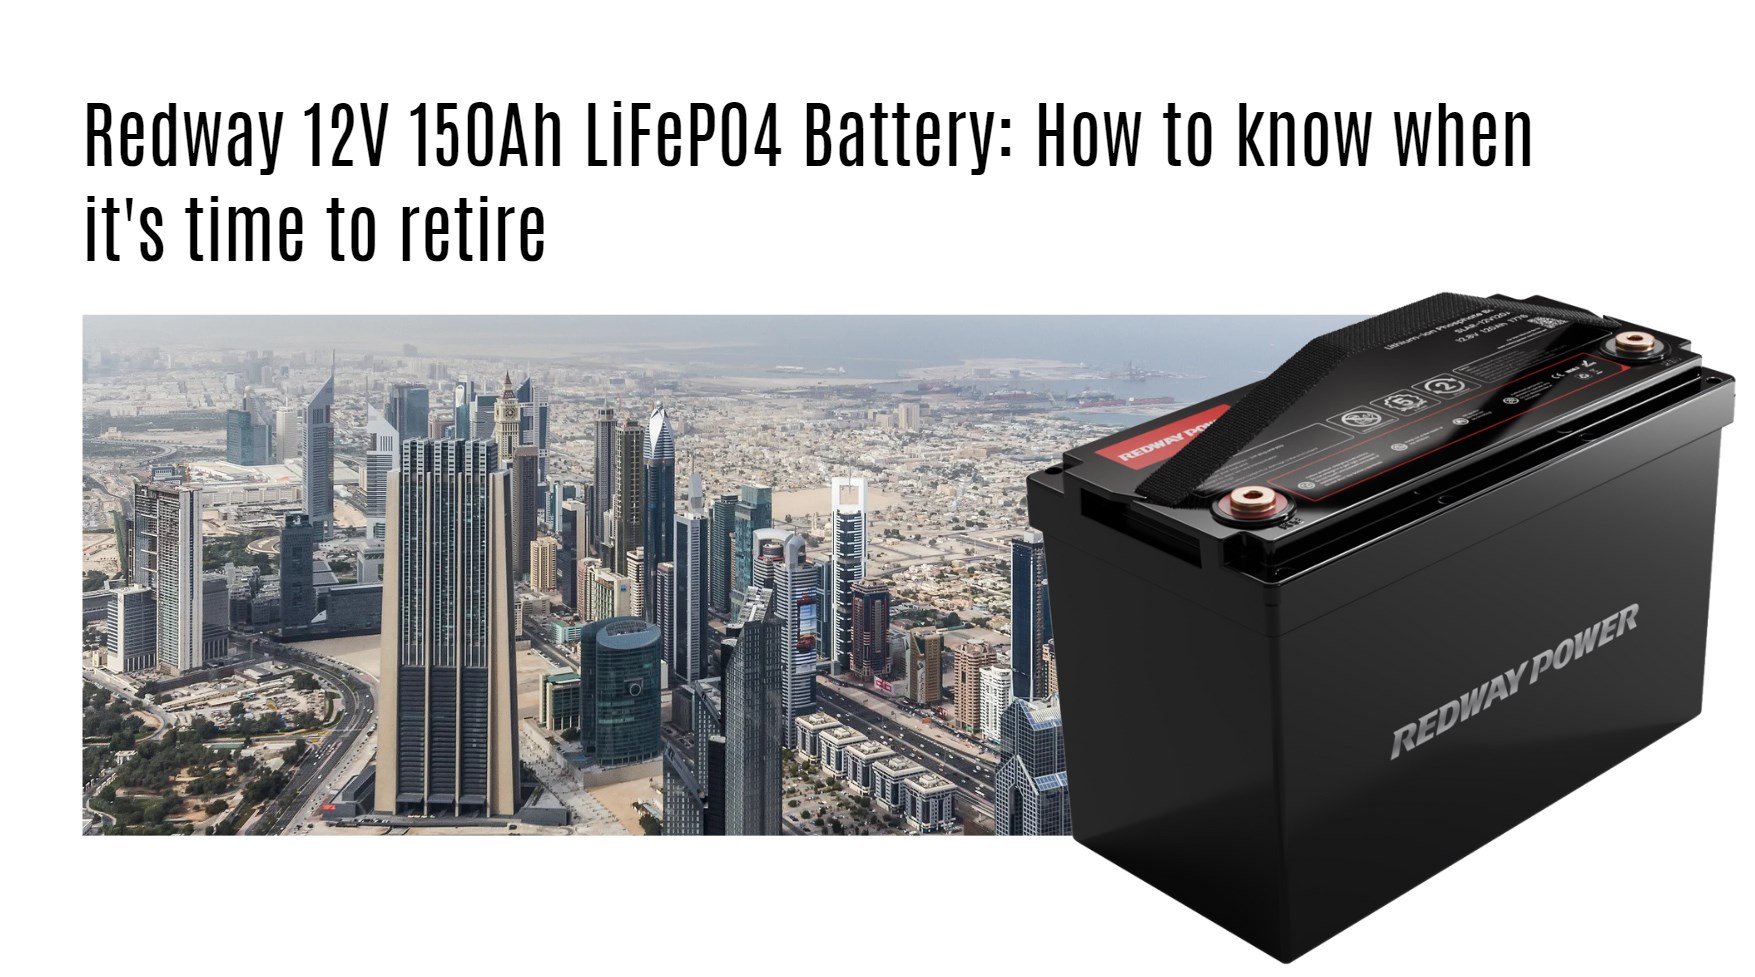 Redway 12V 150Ah LiFePO4 Battery: How to know when it's time to retire